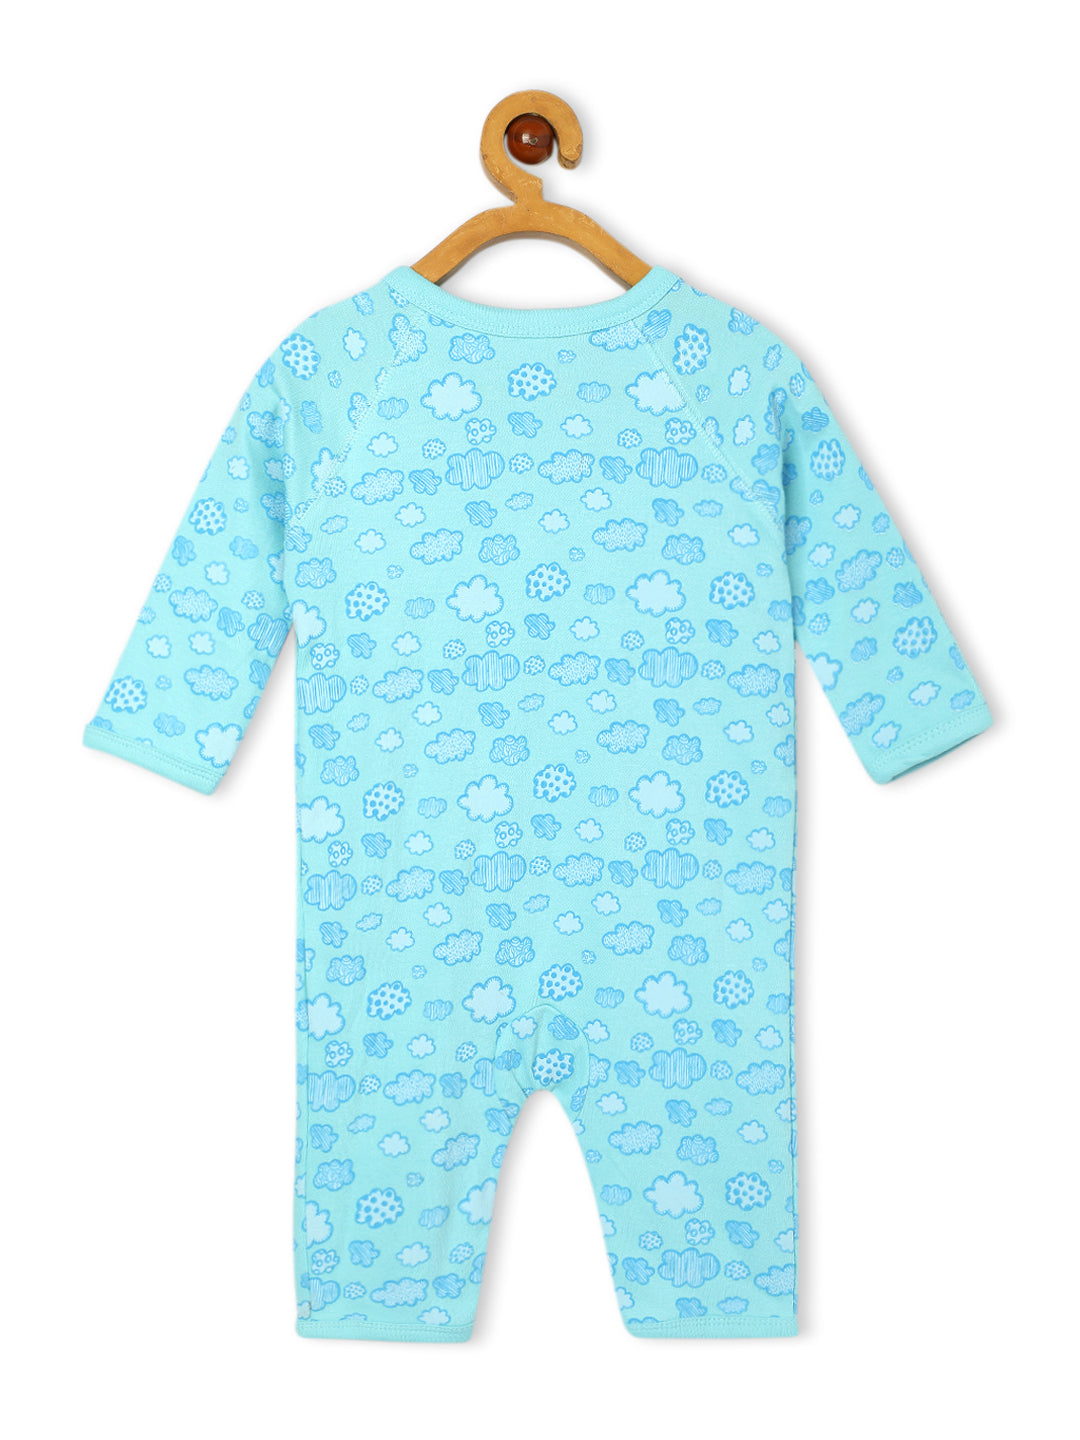 Jabla Infant Romper Combo Of 3: The Astros-Cloudy Celios-The Sun Crown